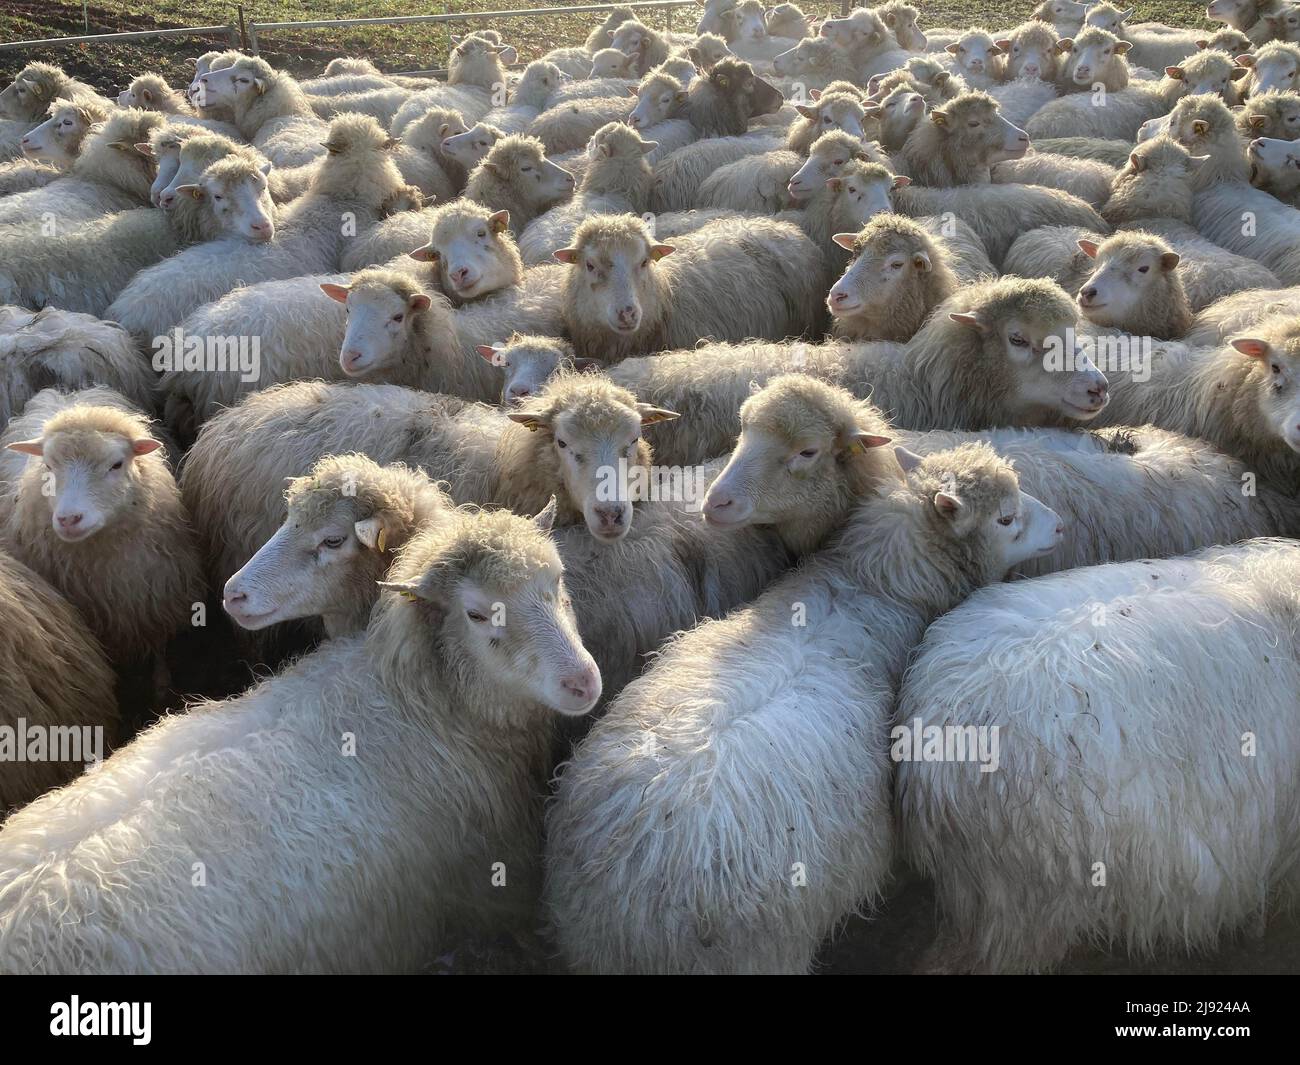 Hornless moorland sheep in a ferch, Mecklenburg-Western Pomerania, Germany Stock Photo